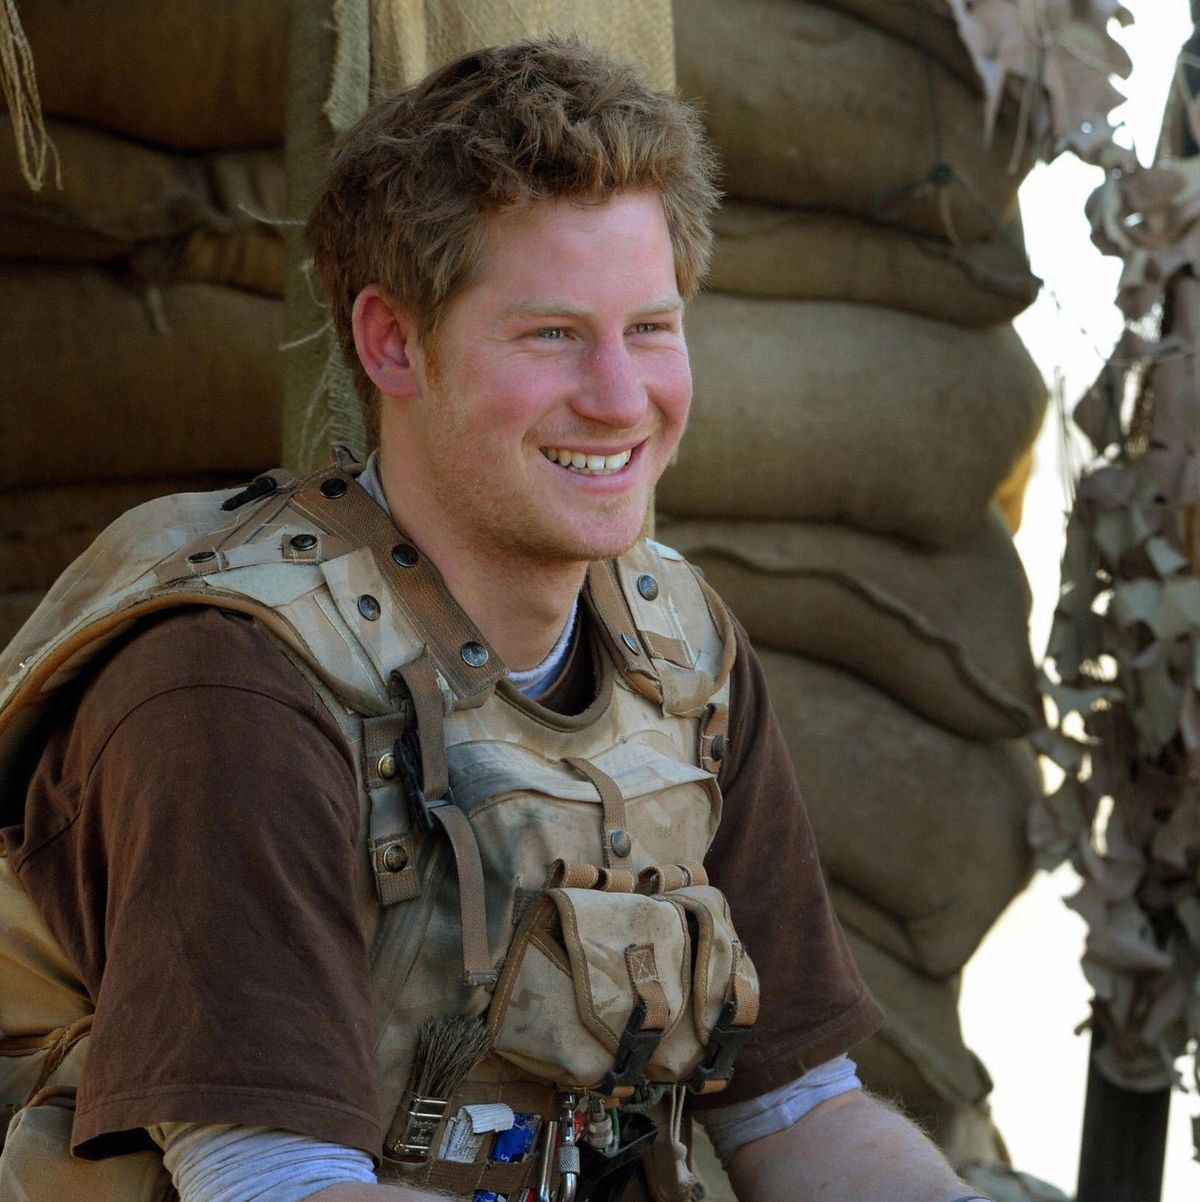 Prince Harry sits in an area of the obse